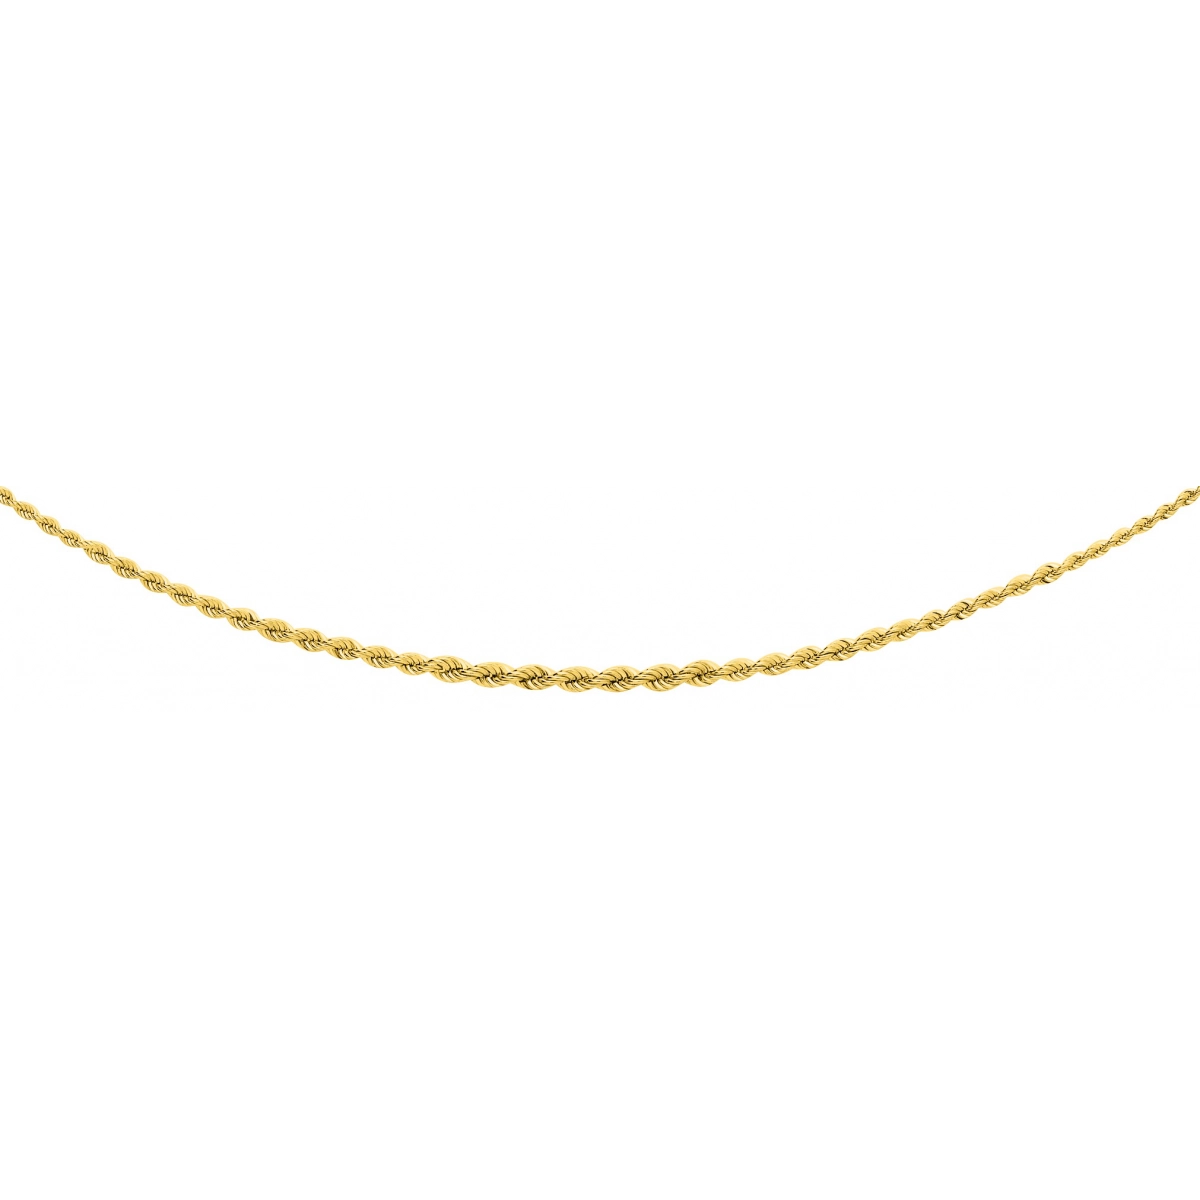 Necklace 'rope chain' grad 18K YG Lua Blanca  M287 - Size 45